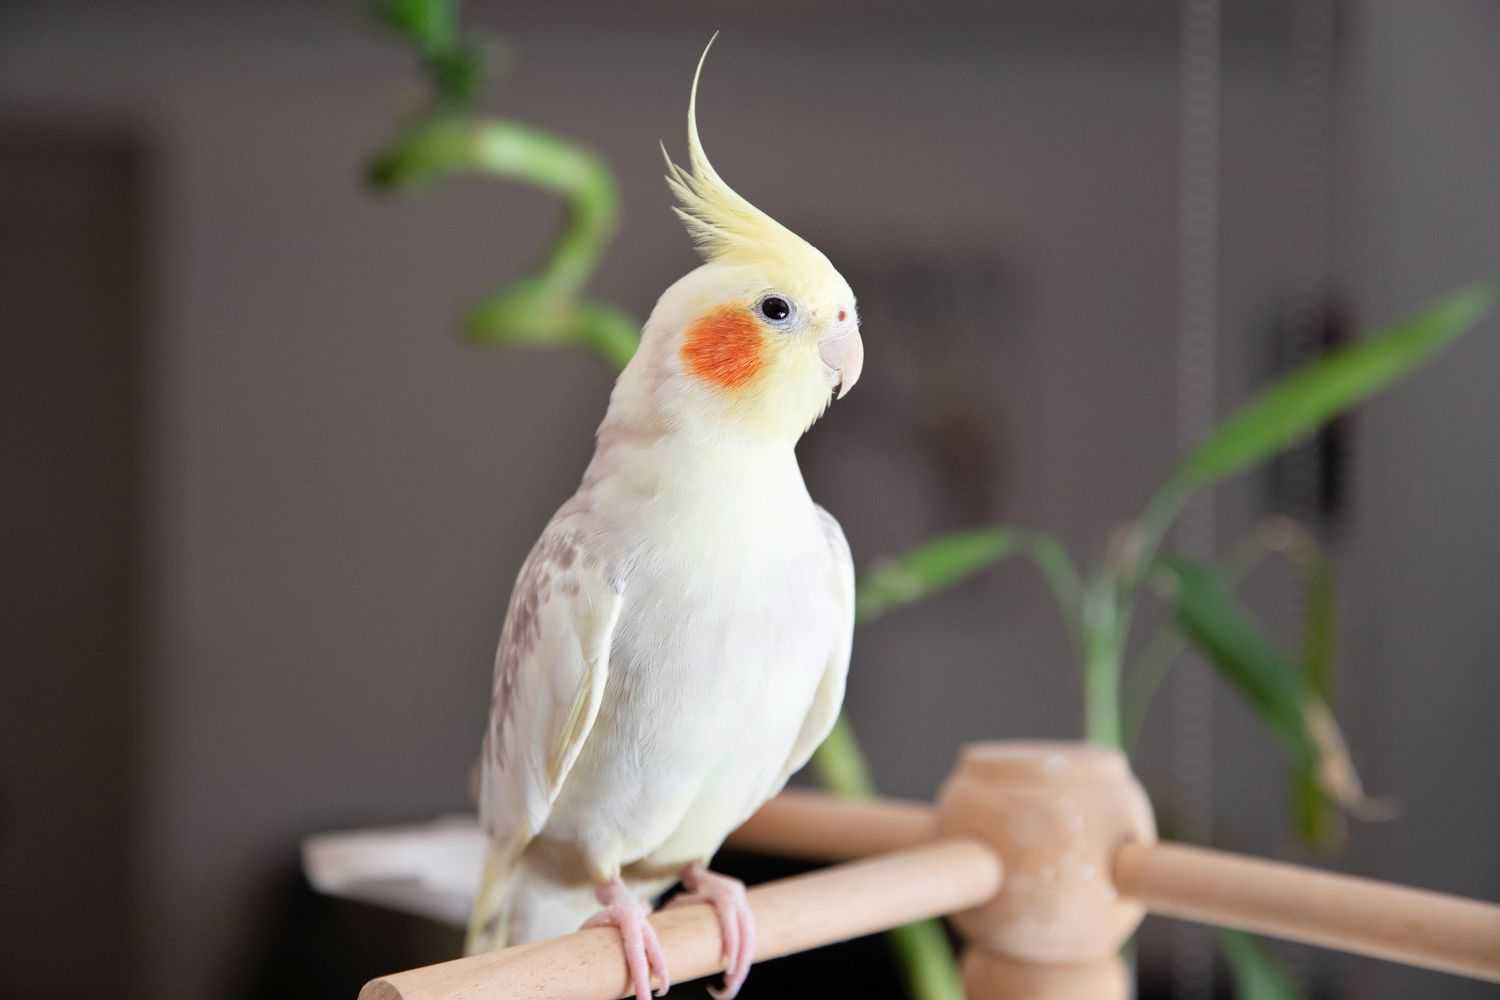 Tips I Use to Keep My Bird from Getting Bored